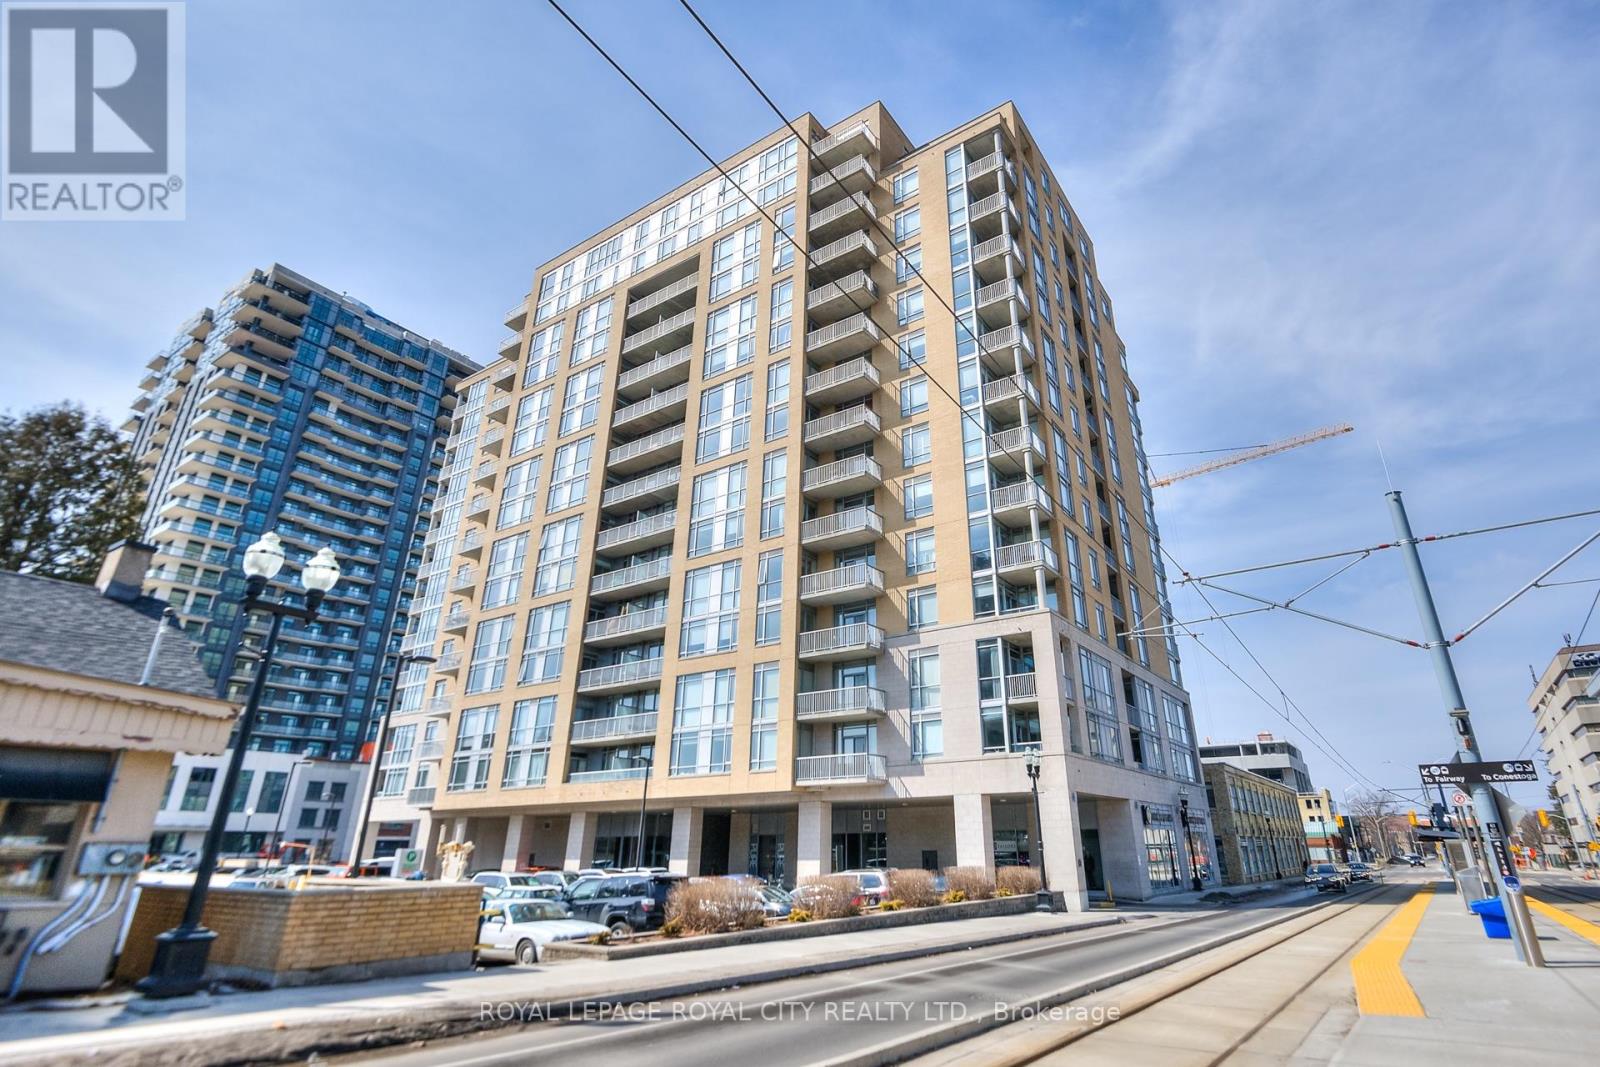 #303 -191 KING ST S, #303